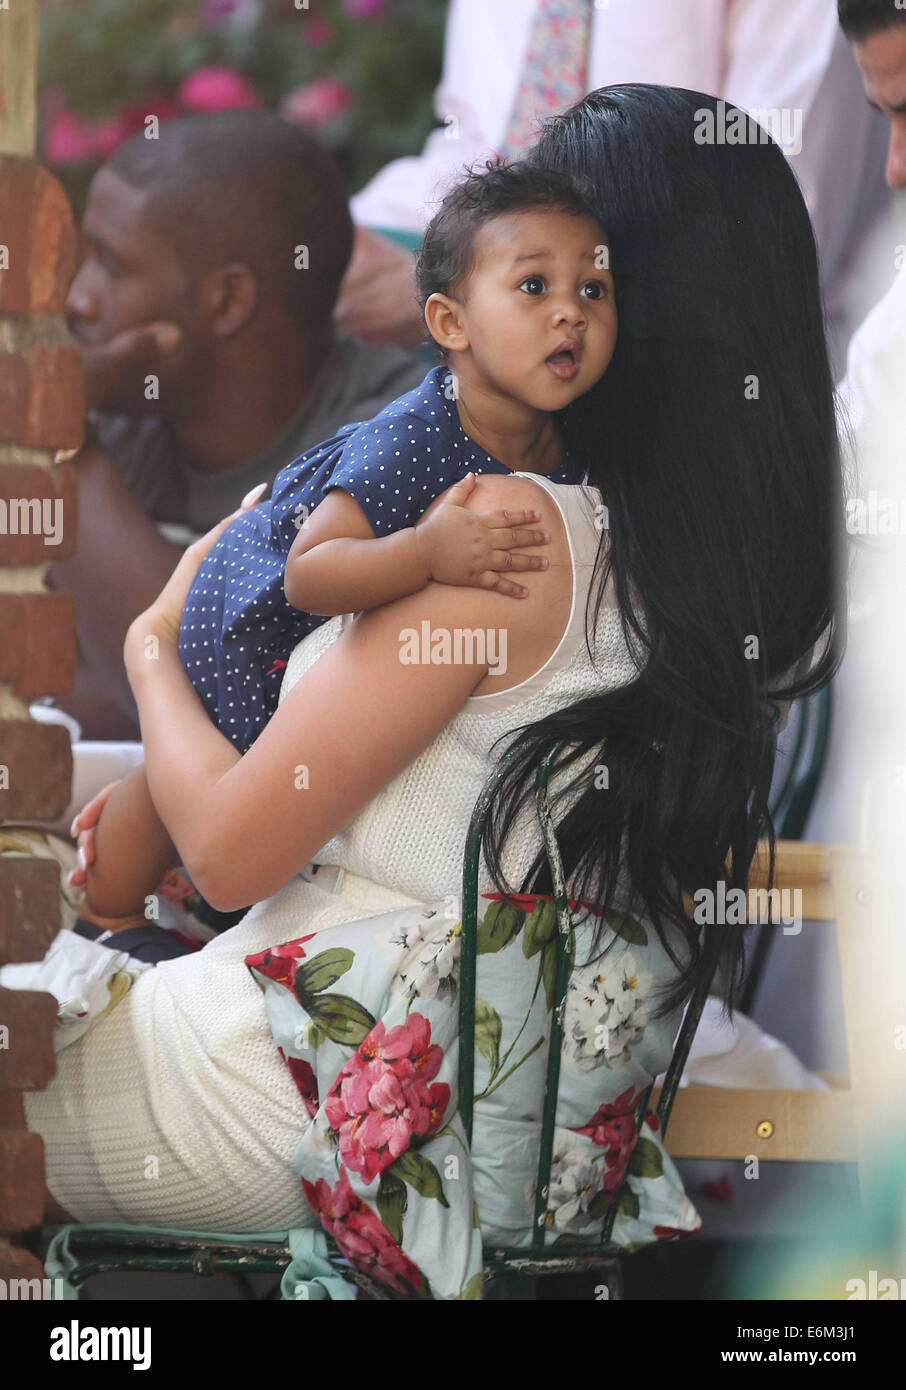 Reggie Bush, Lilit Avagyan and their baby daughter, Briseis having lunch at The Ivy on Robertson Boulevard in West Hollywood  Featuring: Briseis Bush,Lilit Avagyan,Reggie Bush Where: Los Angeles, California, United States When: 20 Feb 2014 Stock Photo